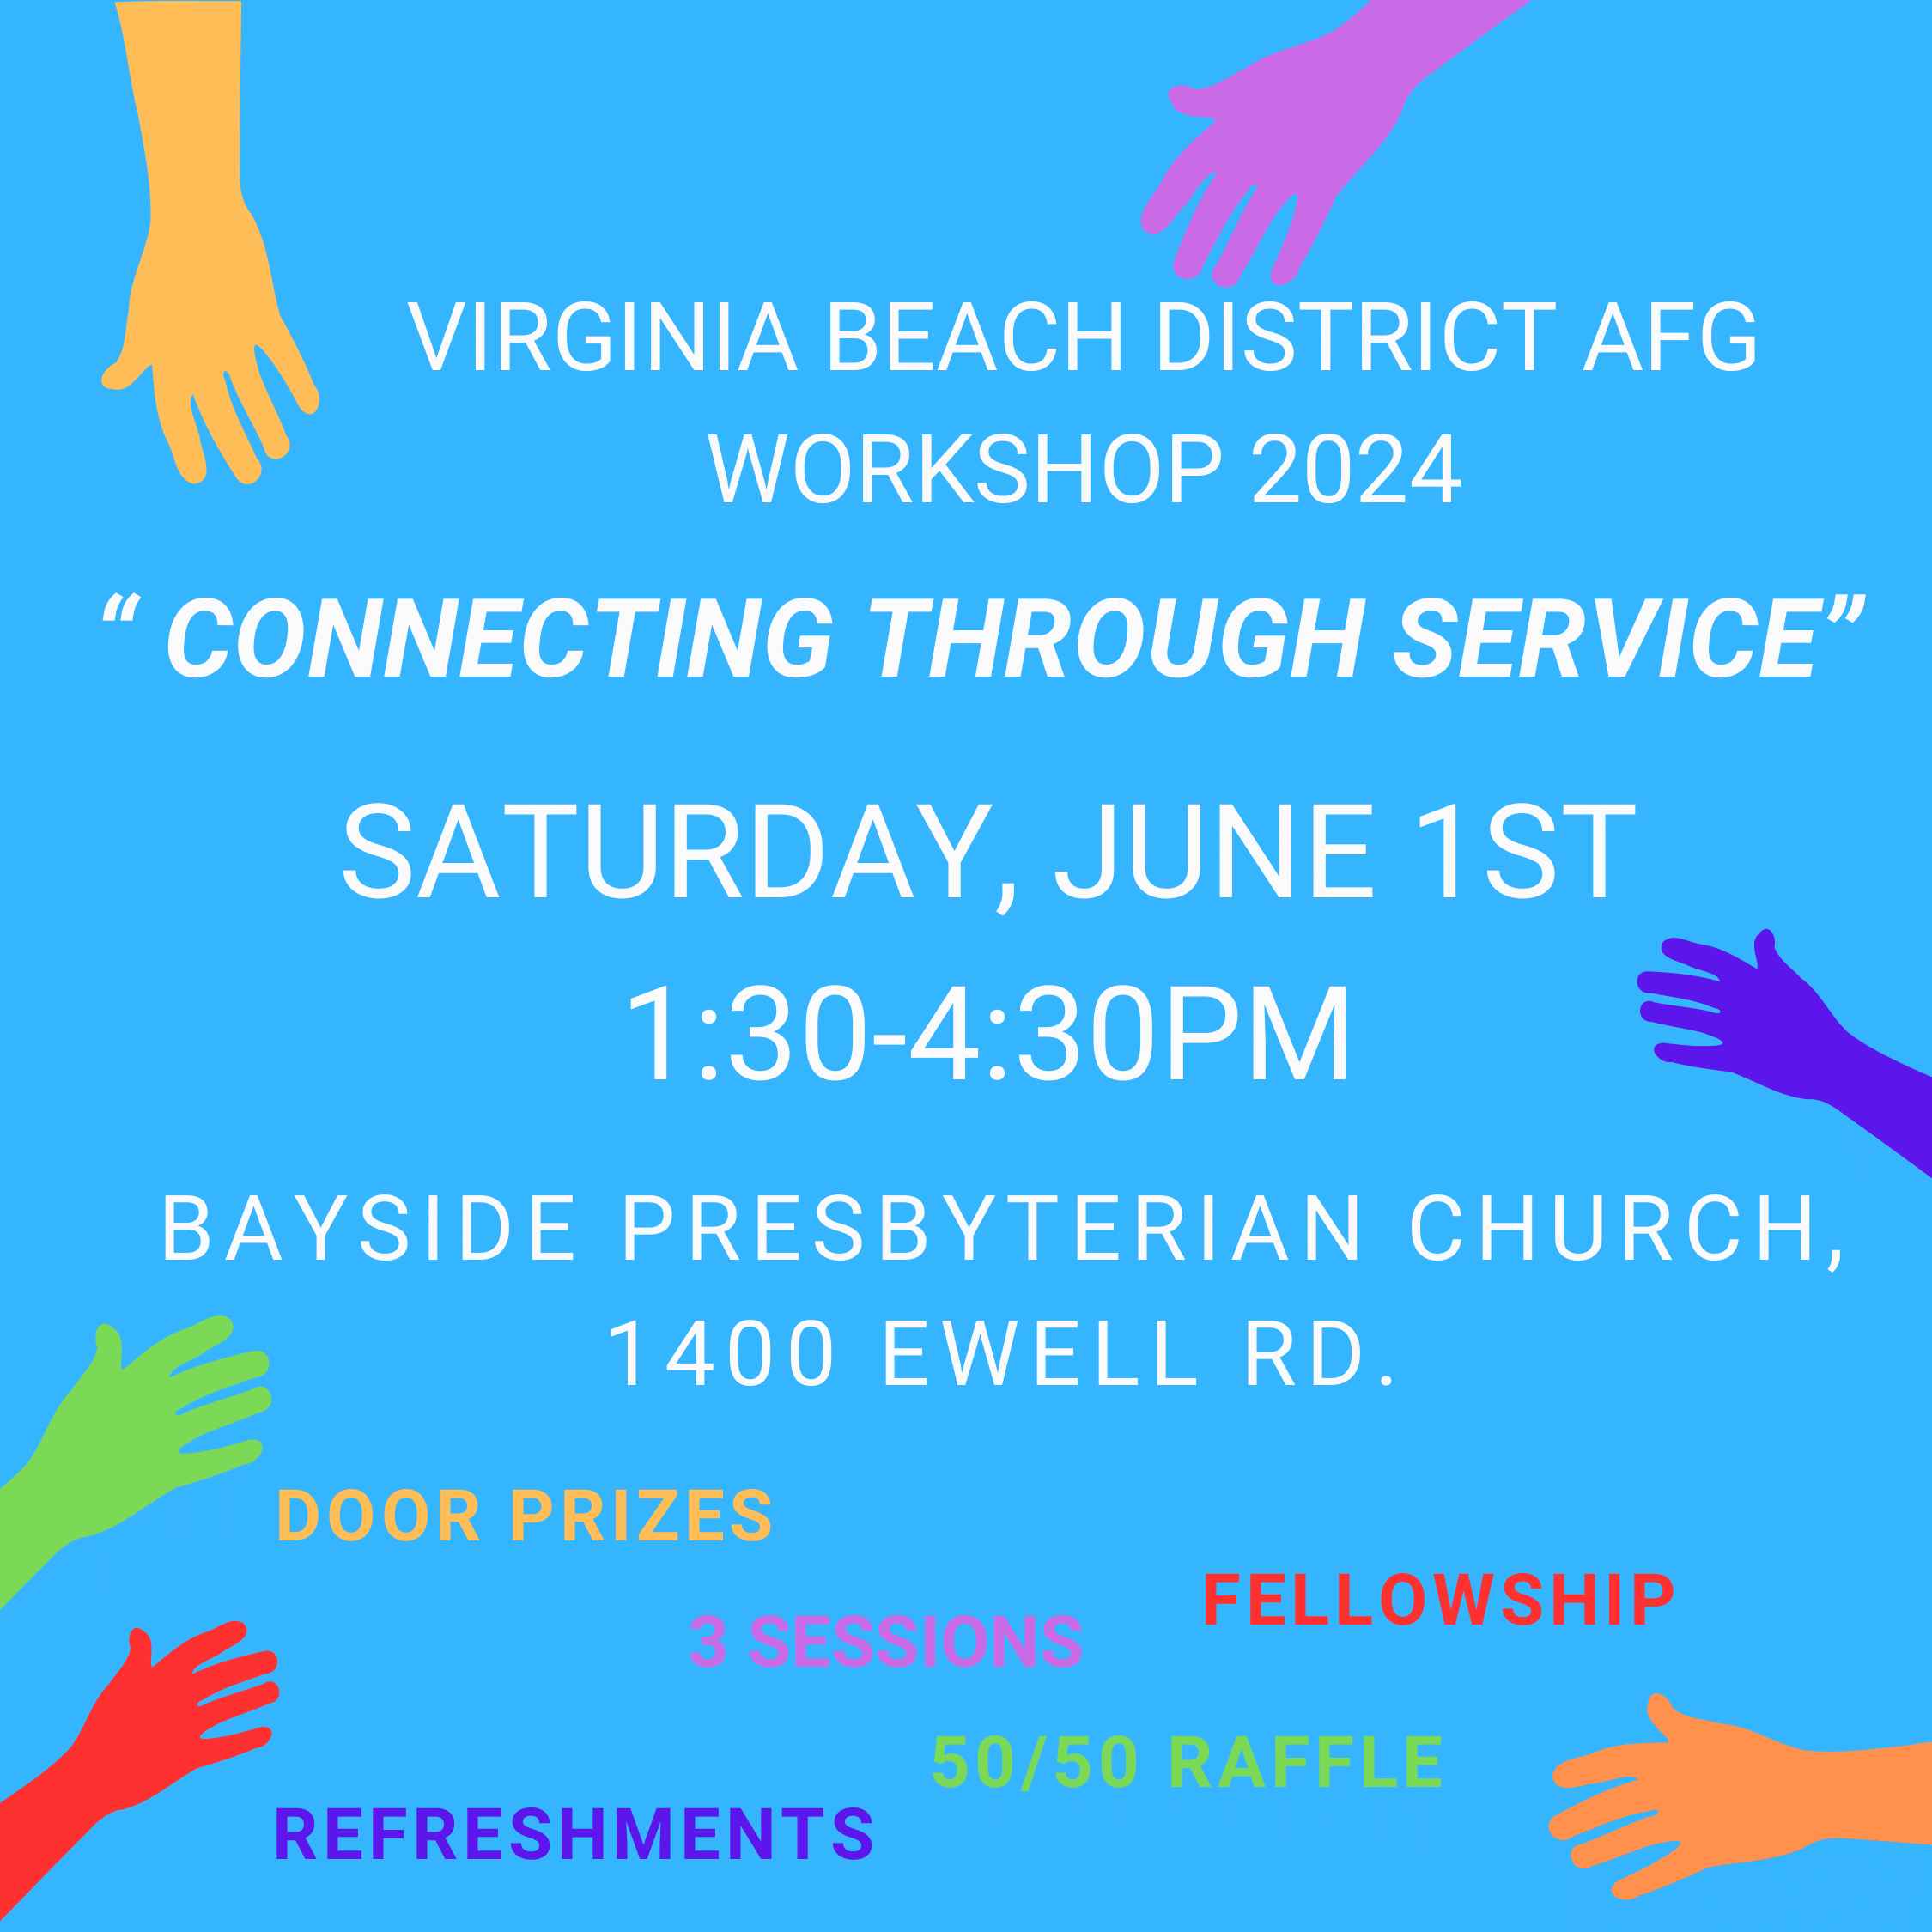 Connecting Through Service flyer image for event on June 1, 2024